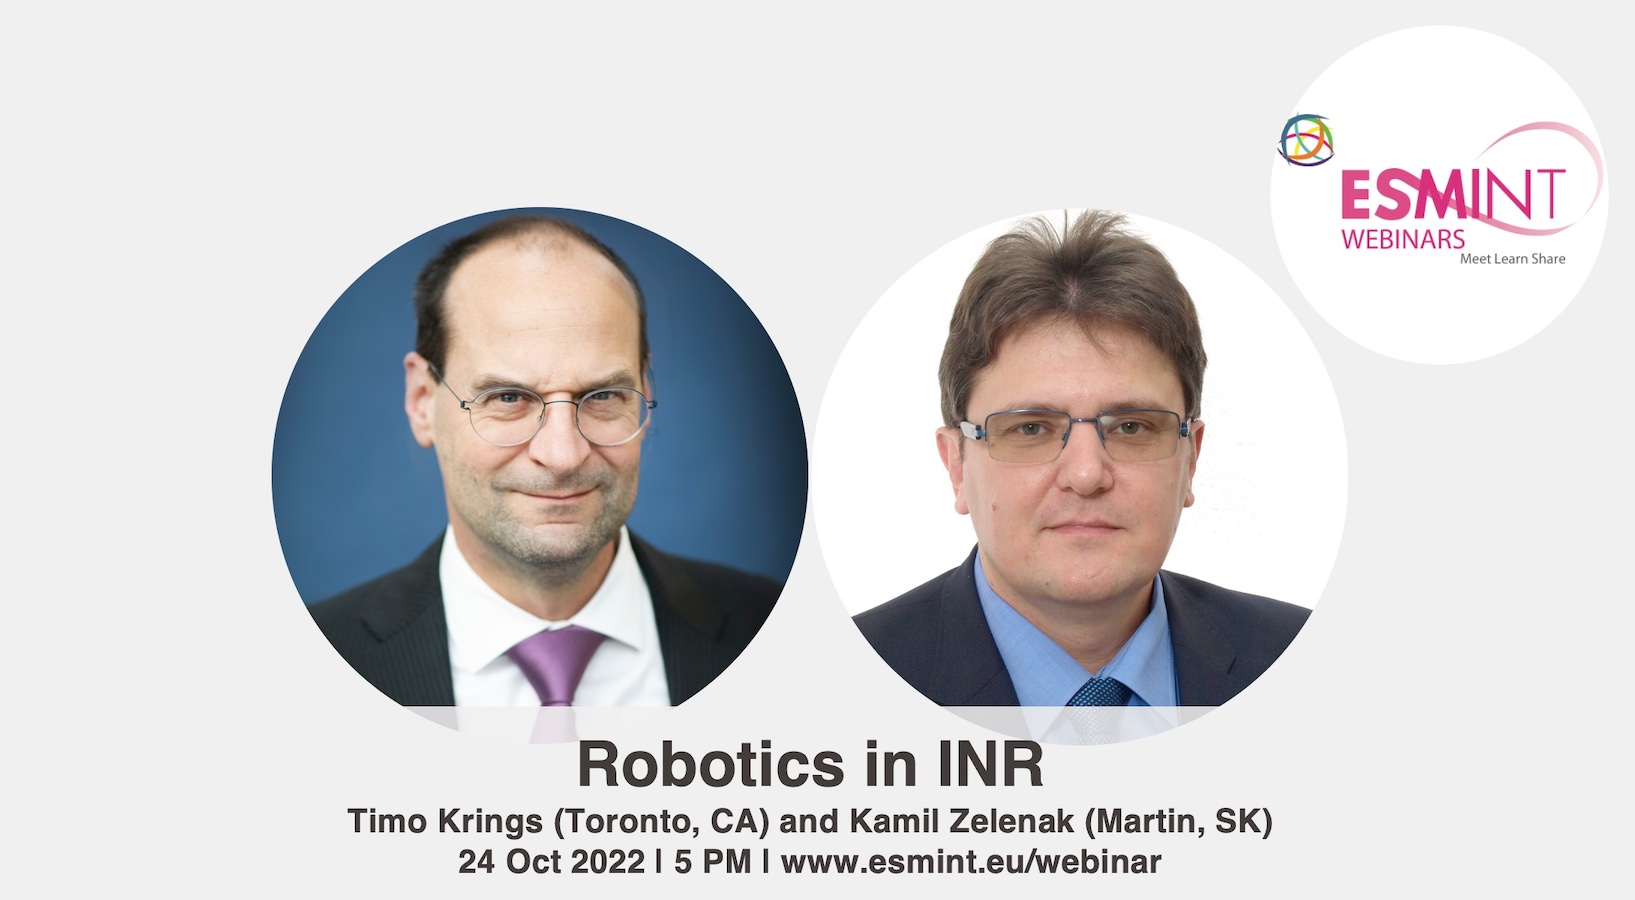 Webinar about Robotics in INR with Dr. Krings and Dr. Zelenak.